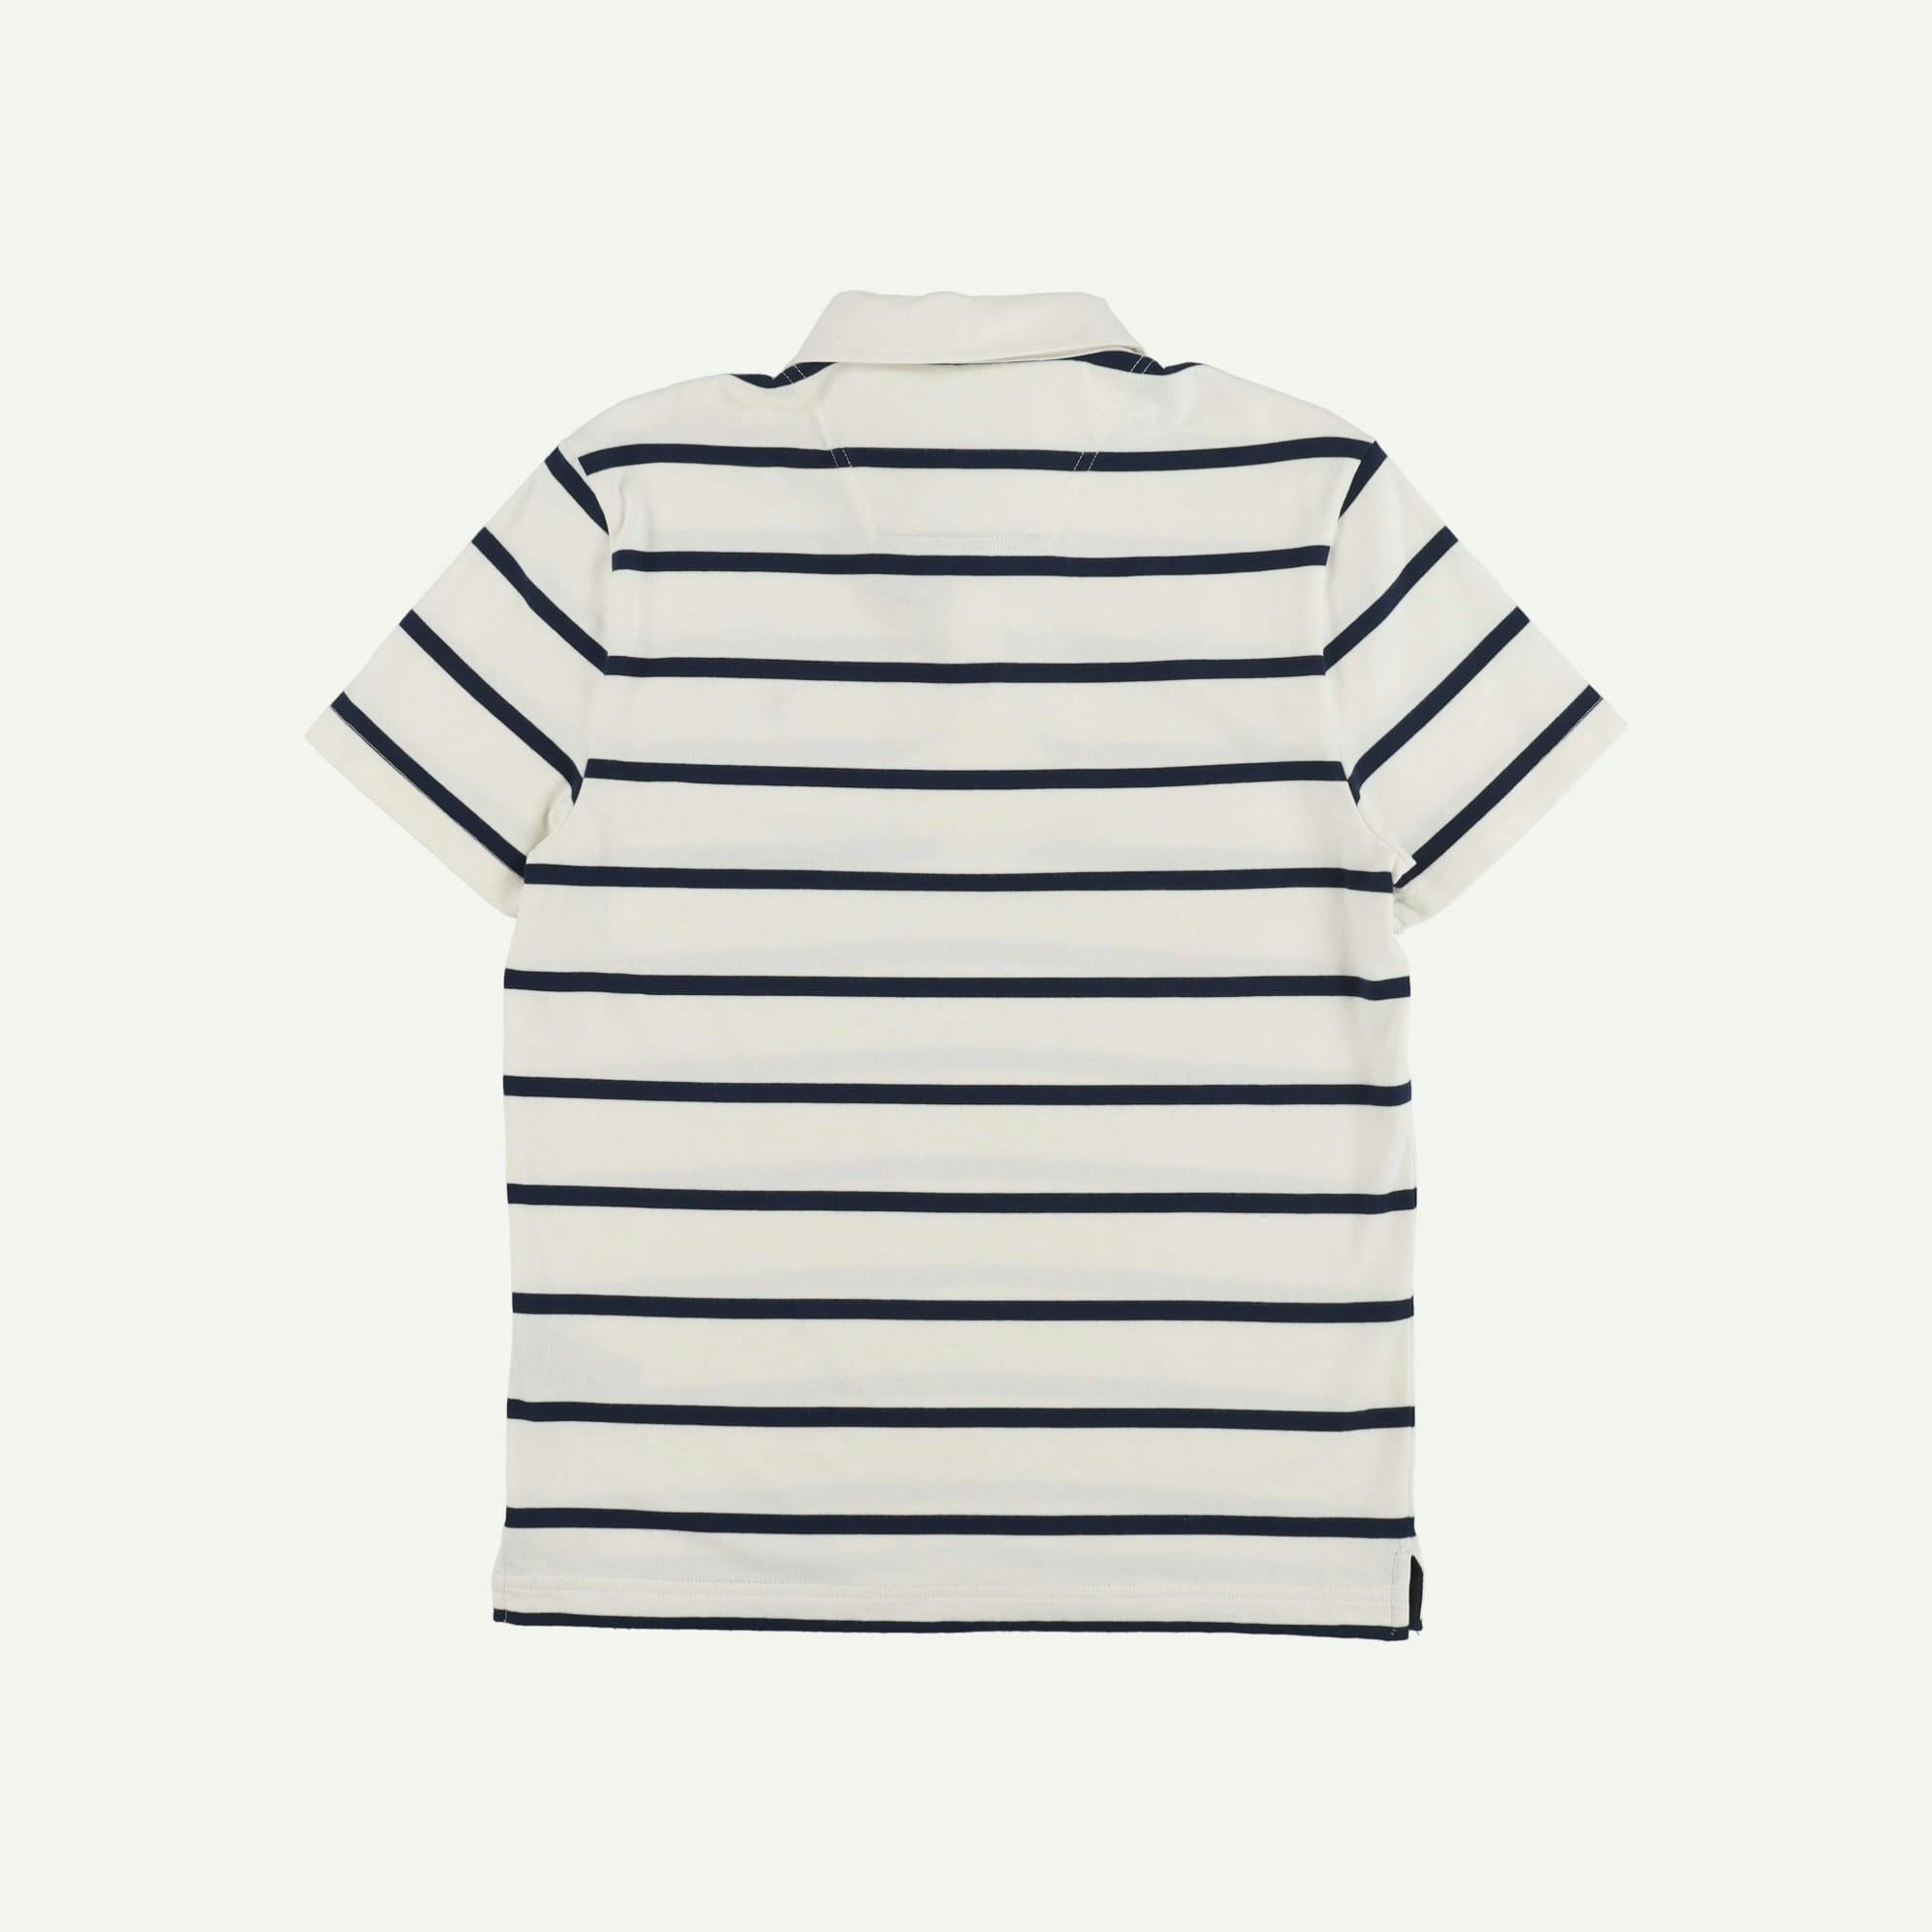 Joules As new White Polo Shirt